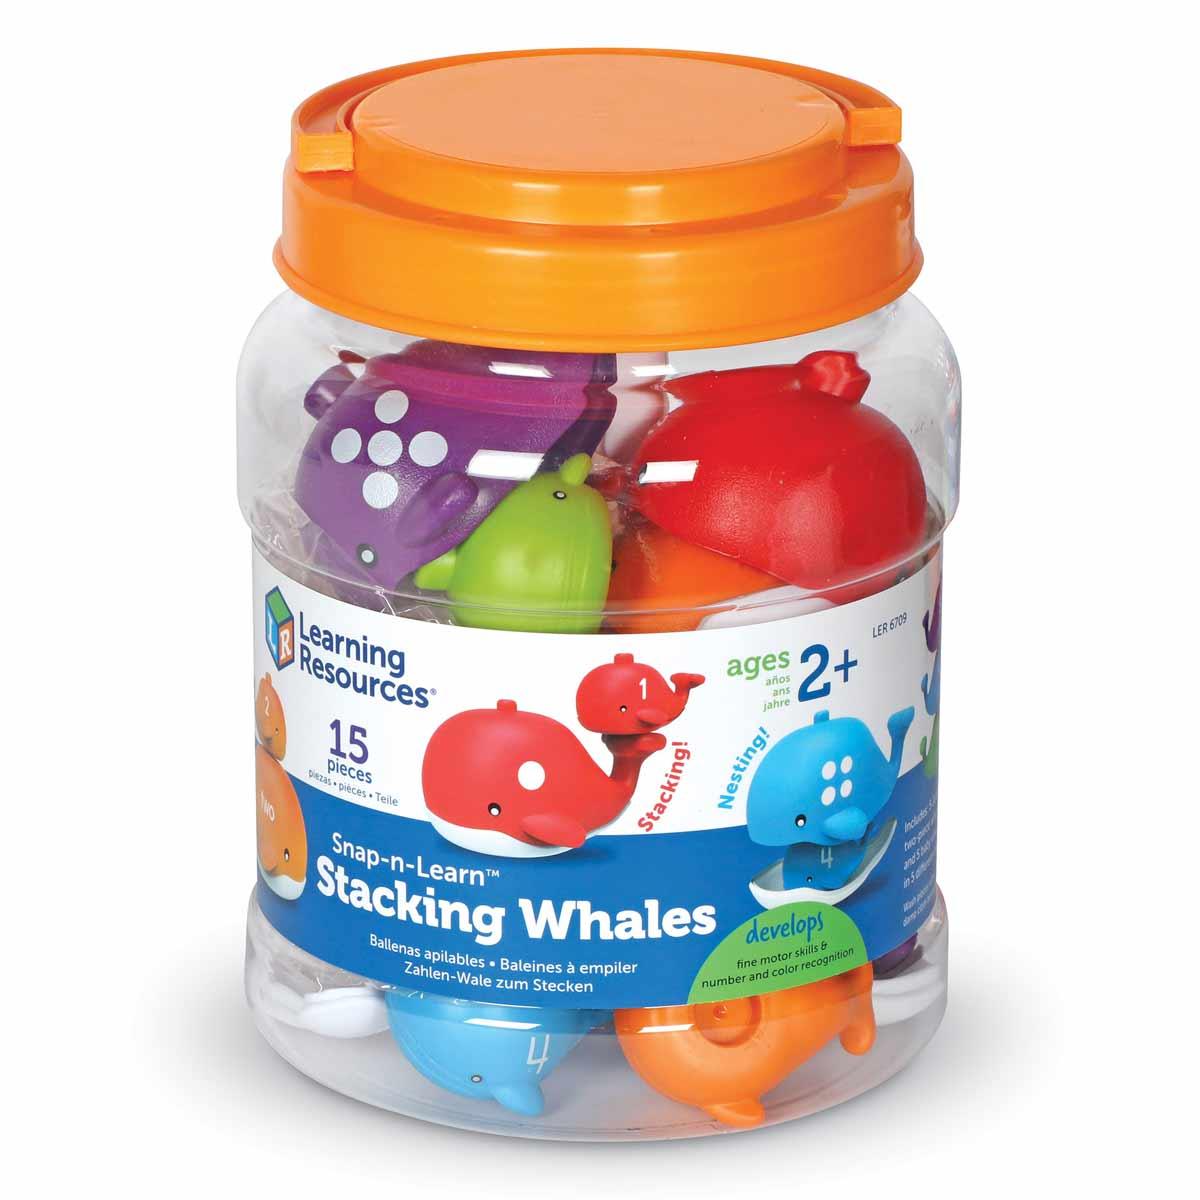 Snap-n-Learn™ Stacking Whales - MoonyBoon